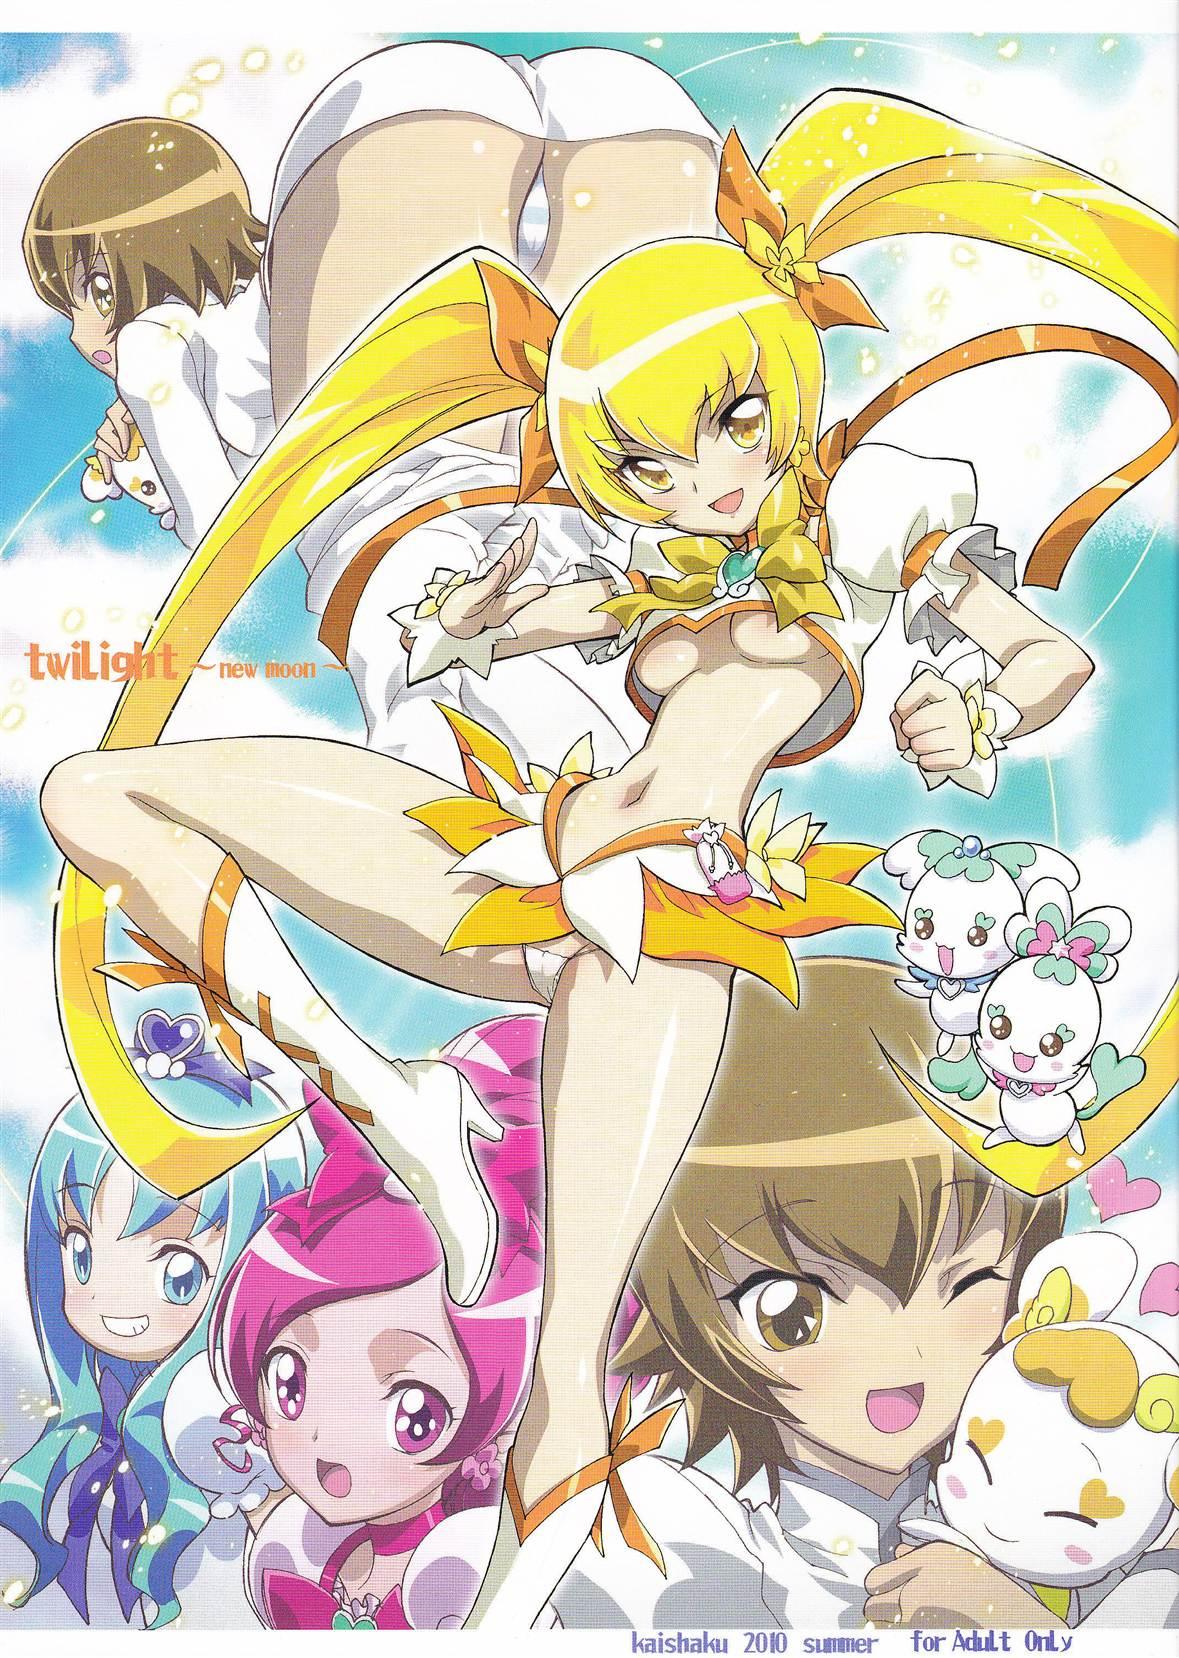 Unshaved Twilight ～Newmoon～ - Pretty cure Heartcatch precure Tugging - Page 1